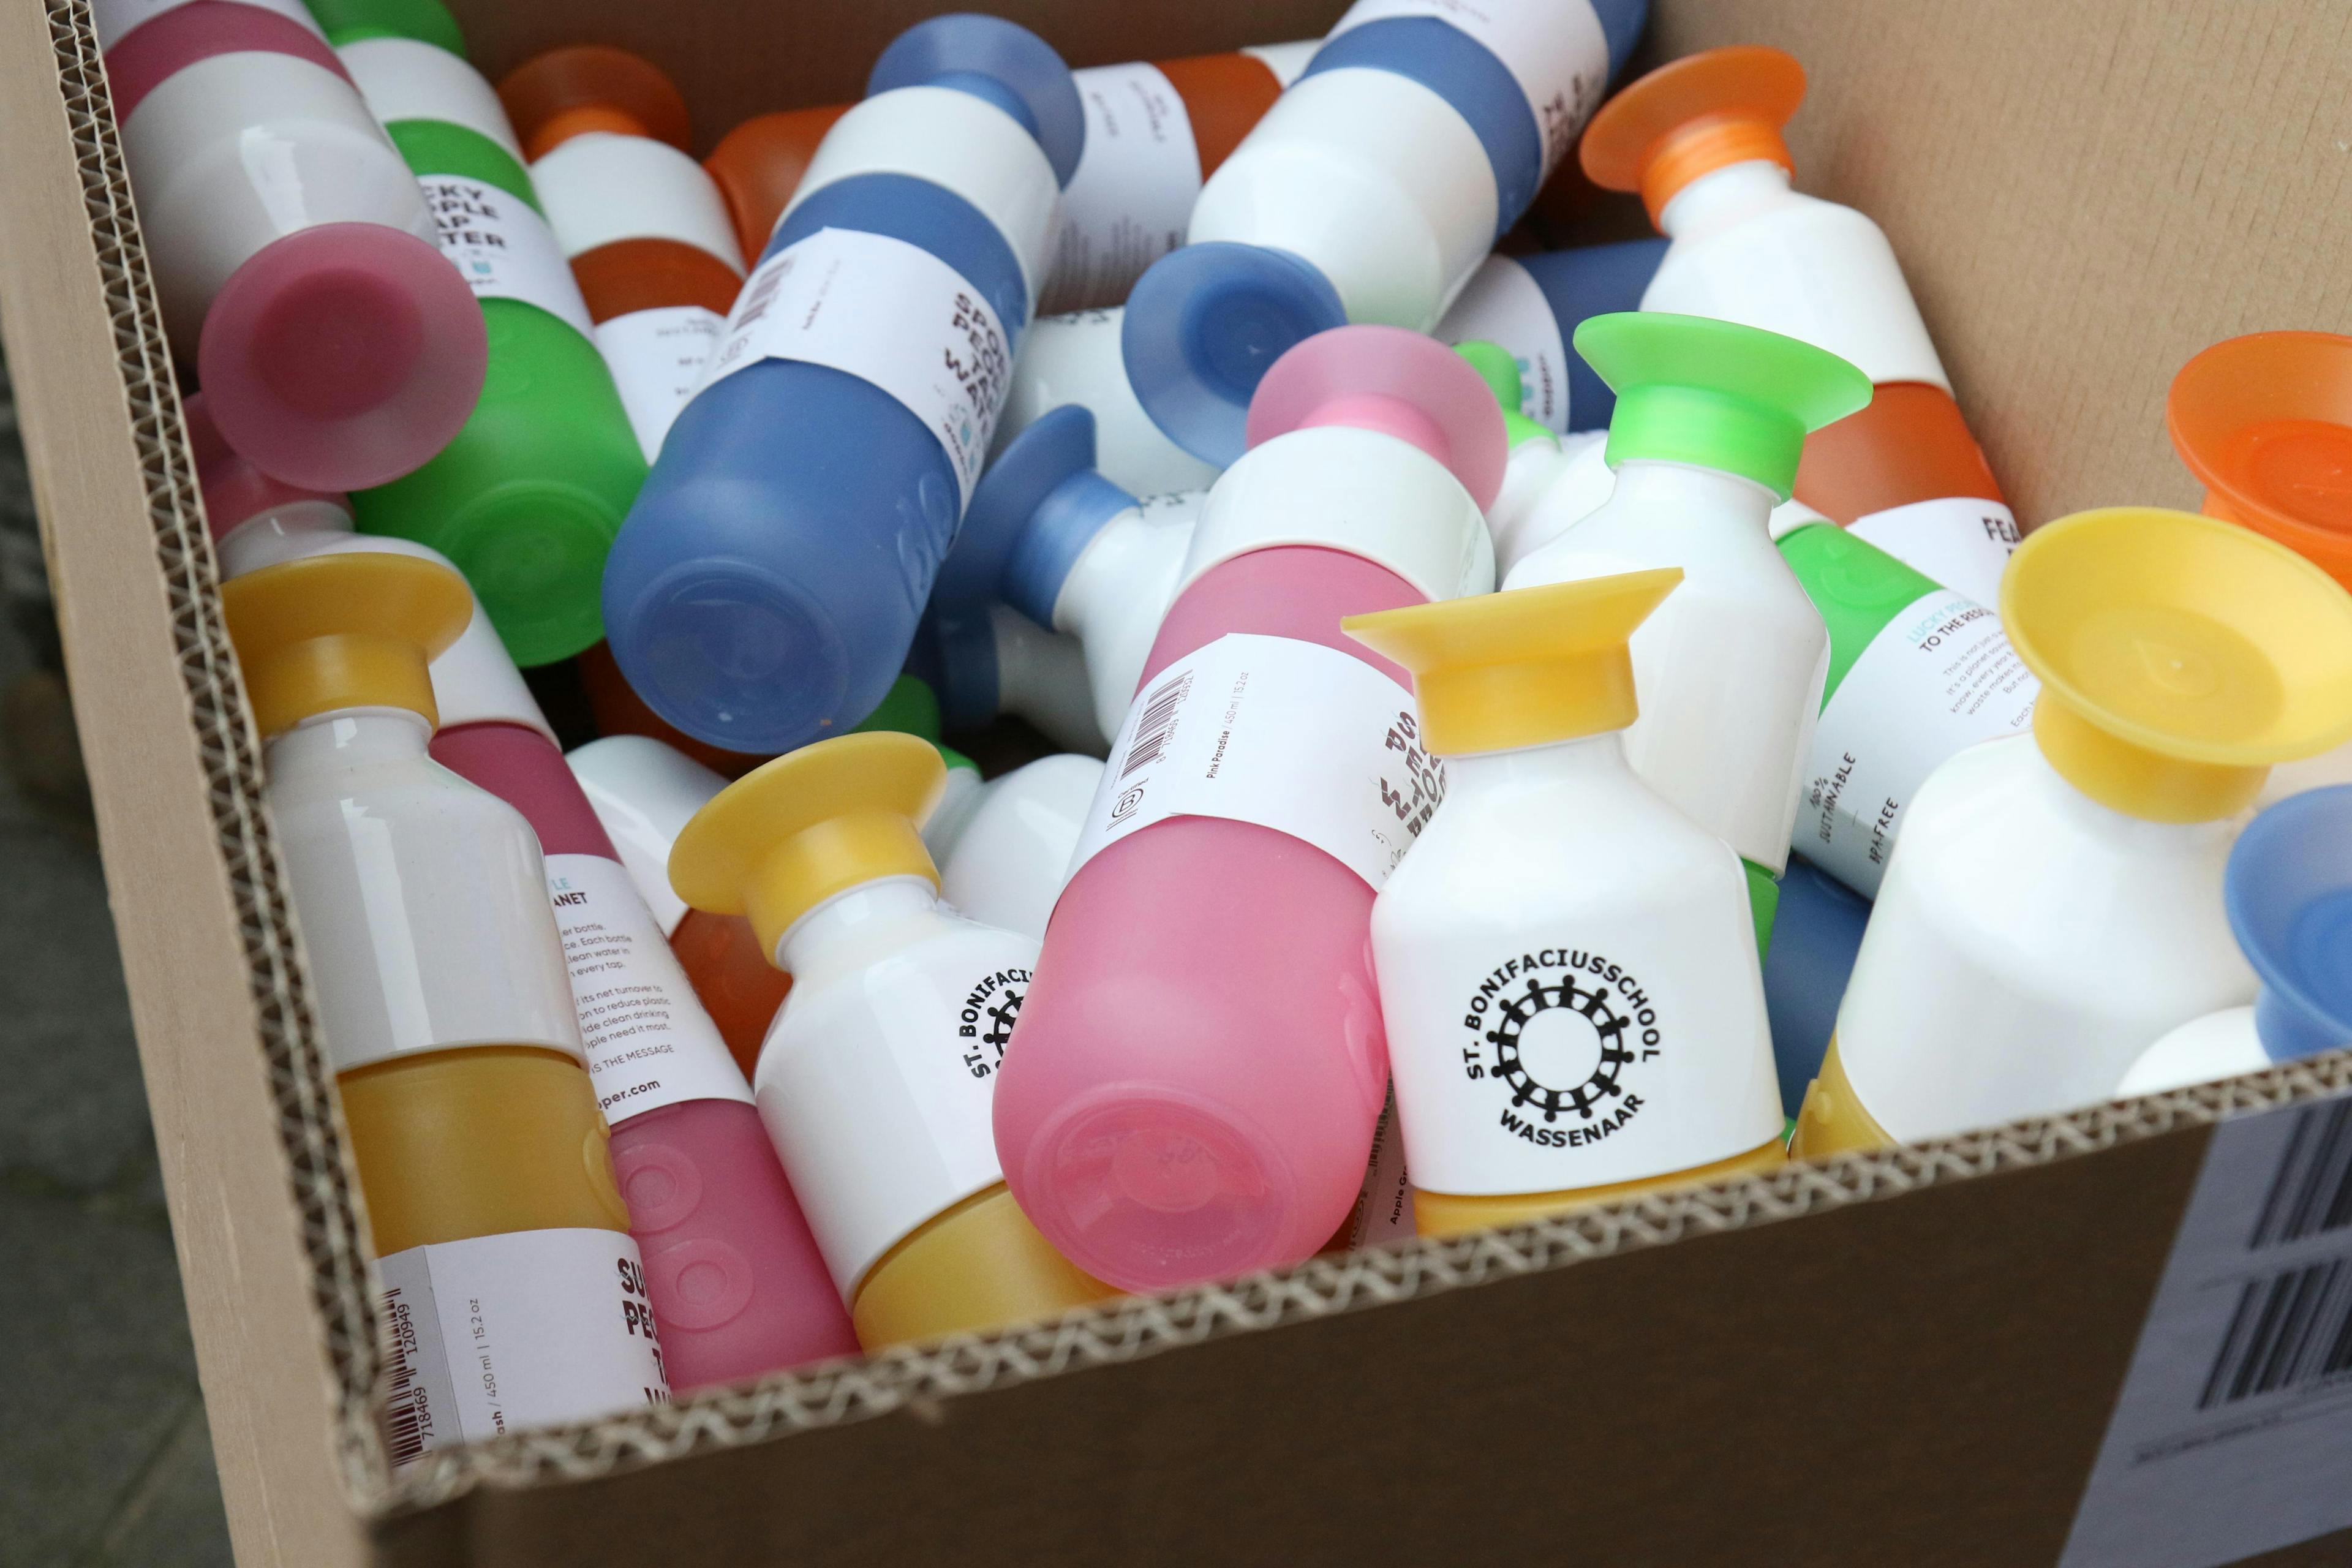 A box filled with colourful Dopper bottles and a school's logo on the cups